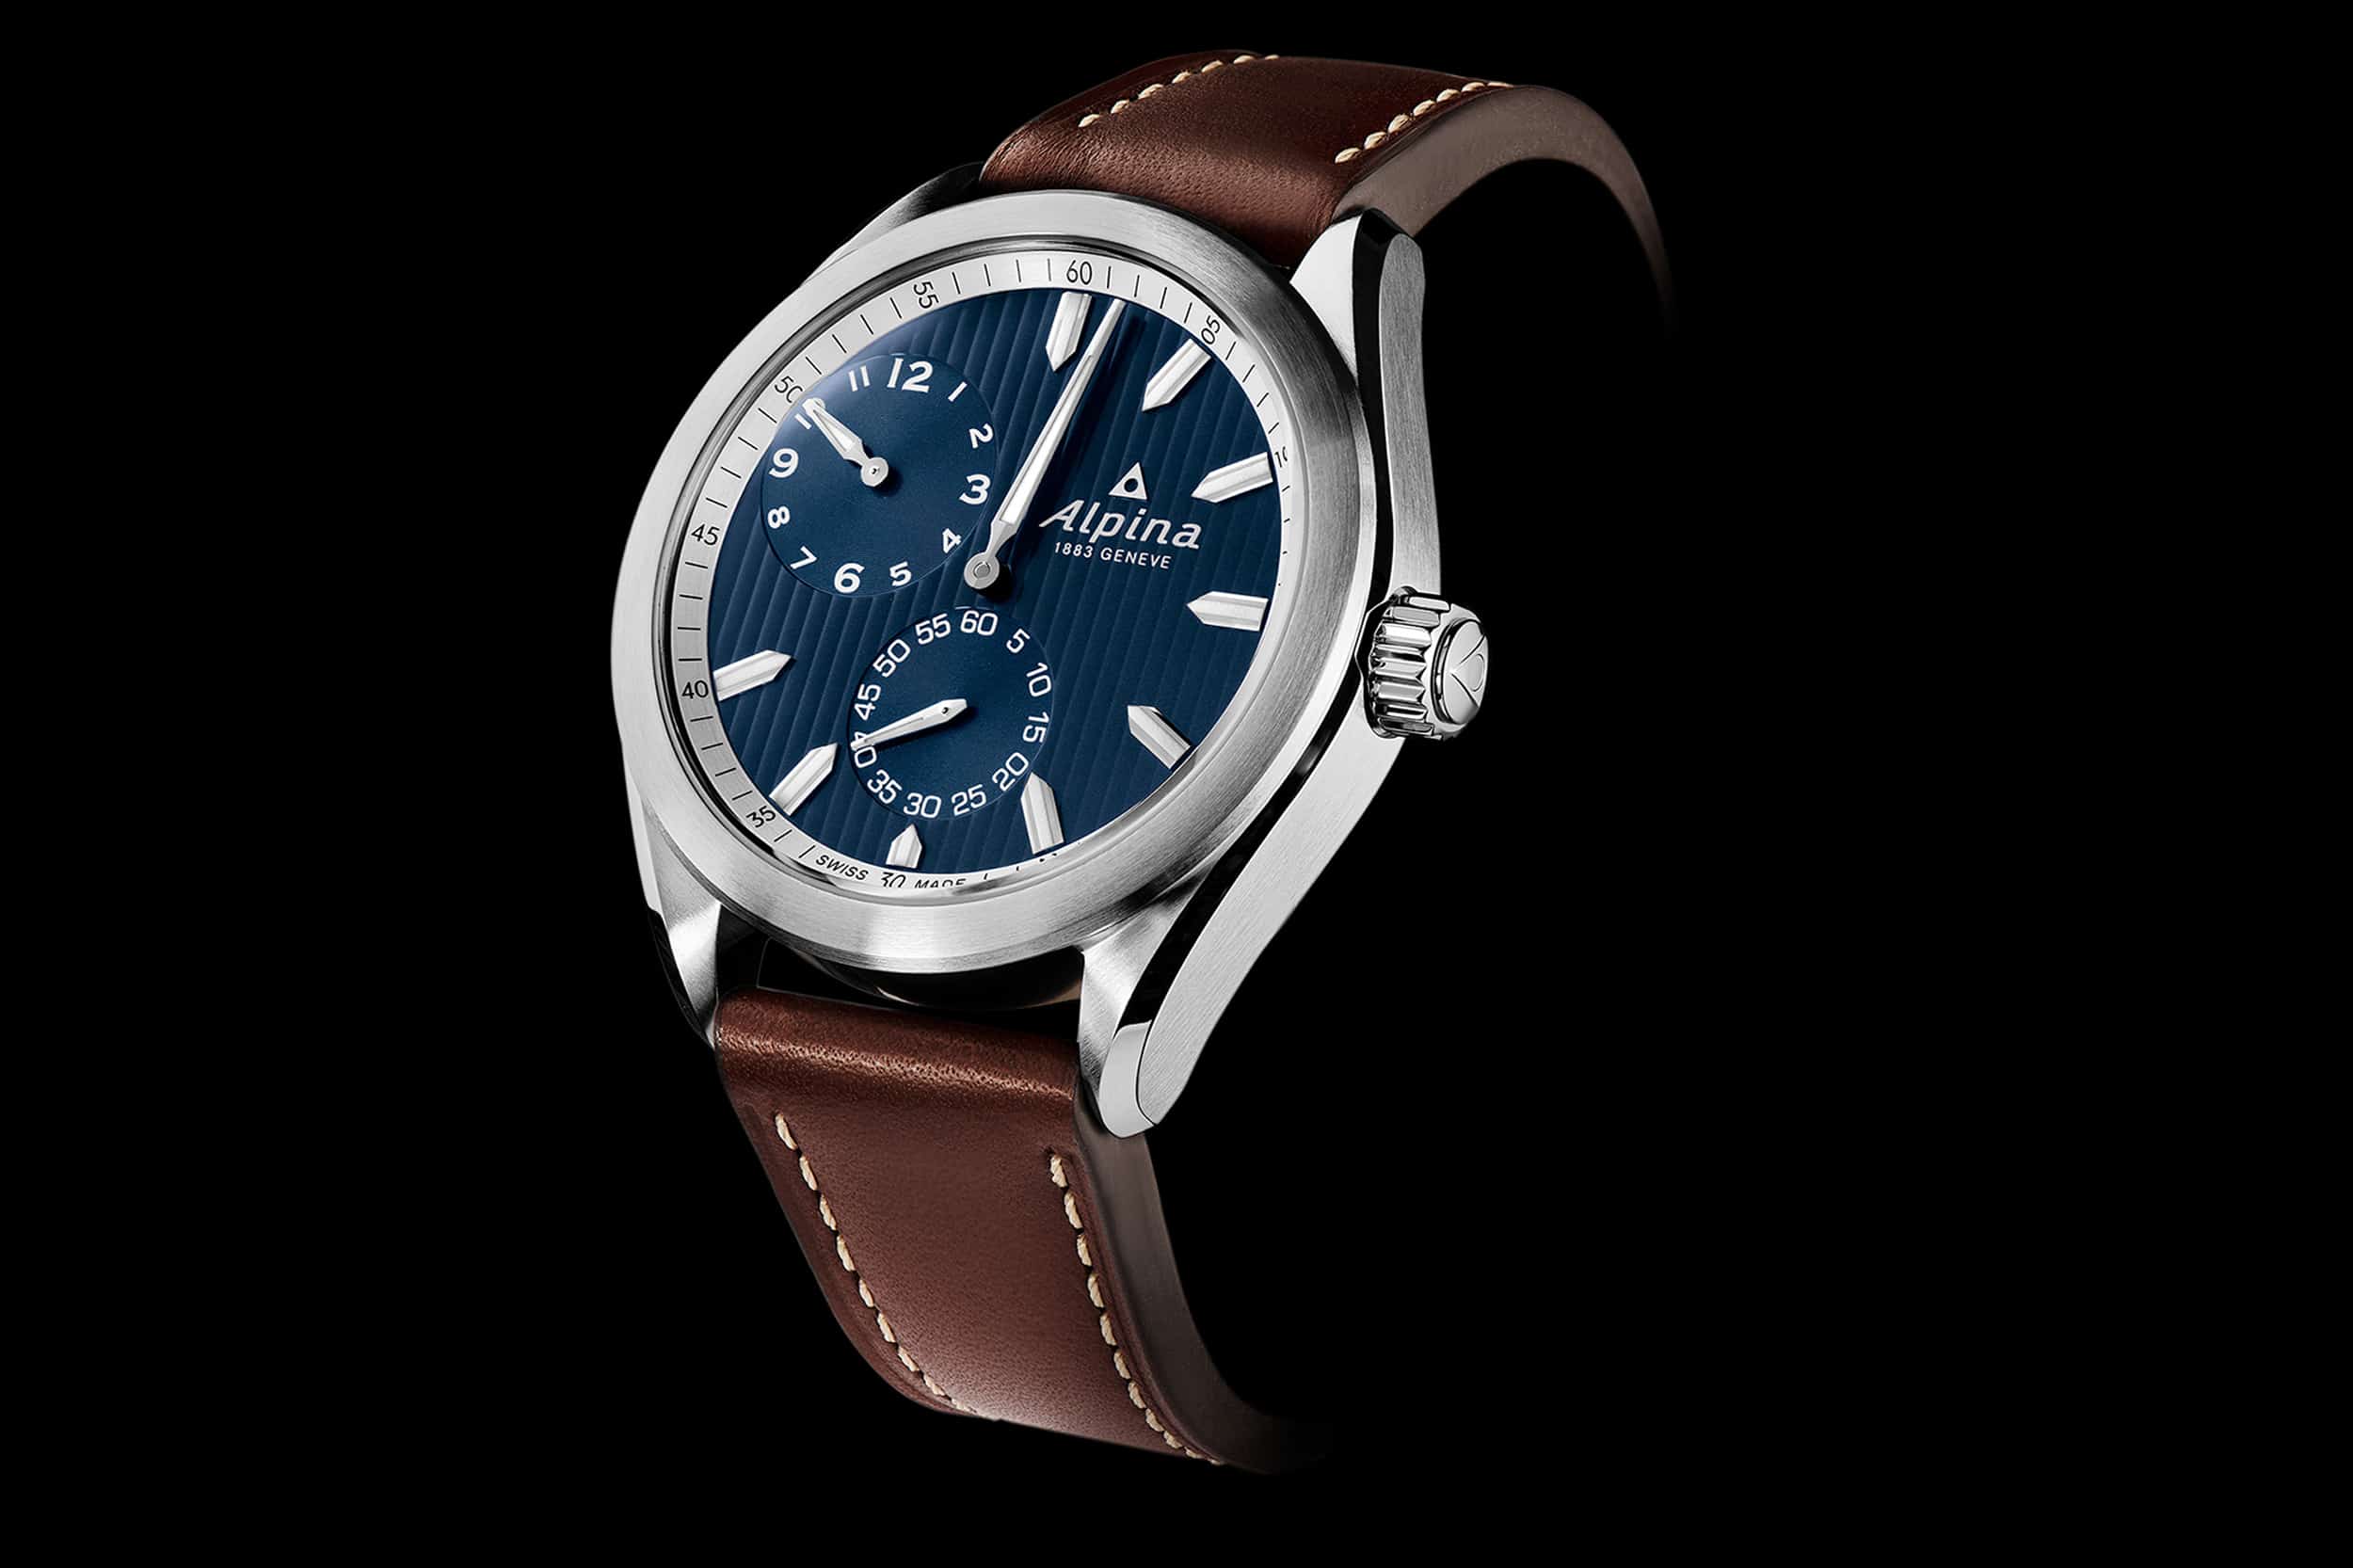 Alpina Introduces a New Sporty Take on the Classic Regulator